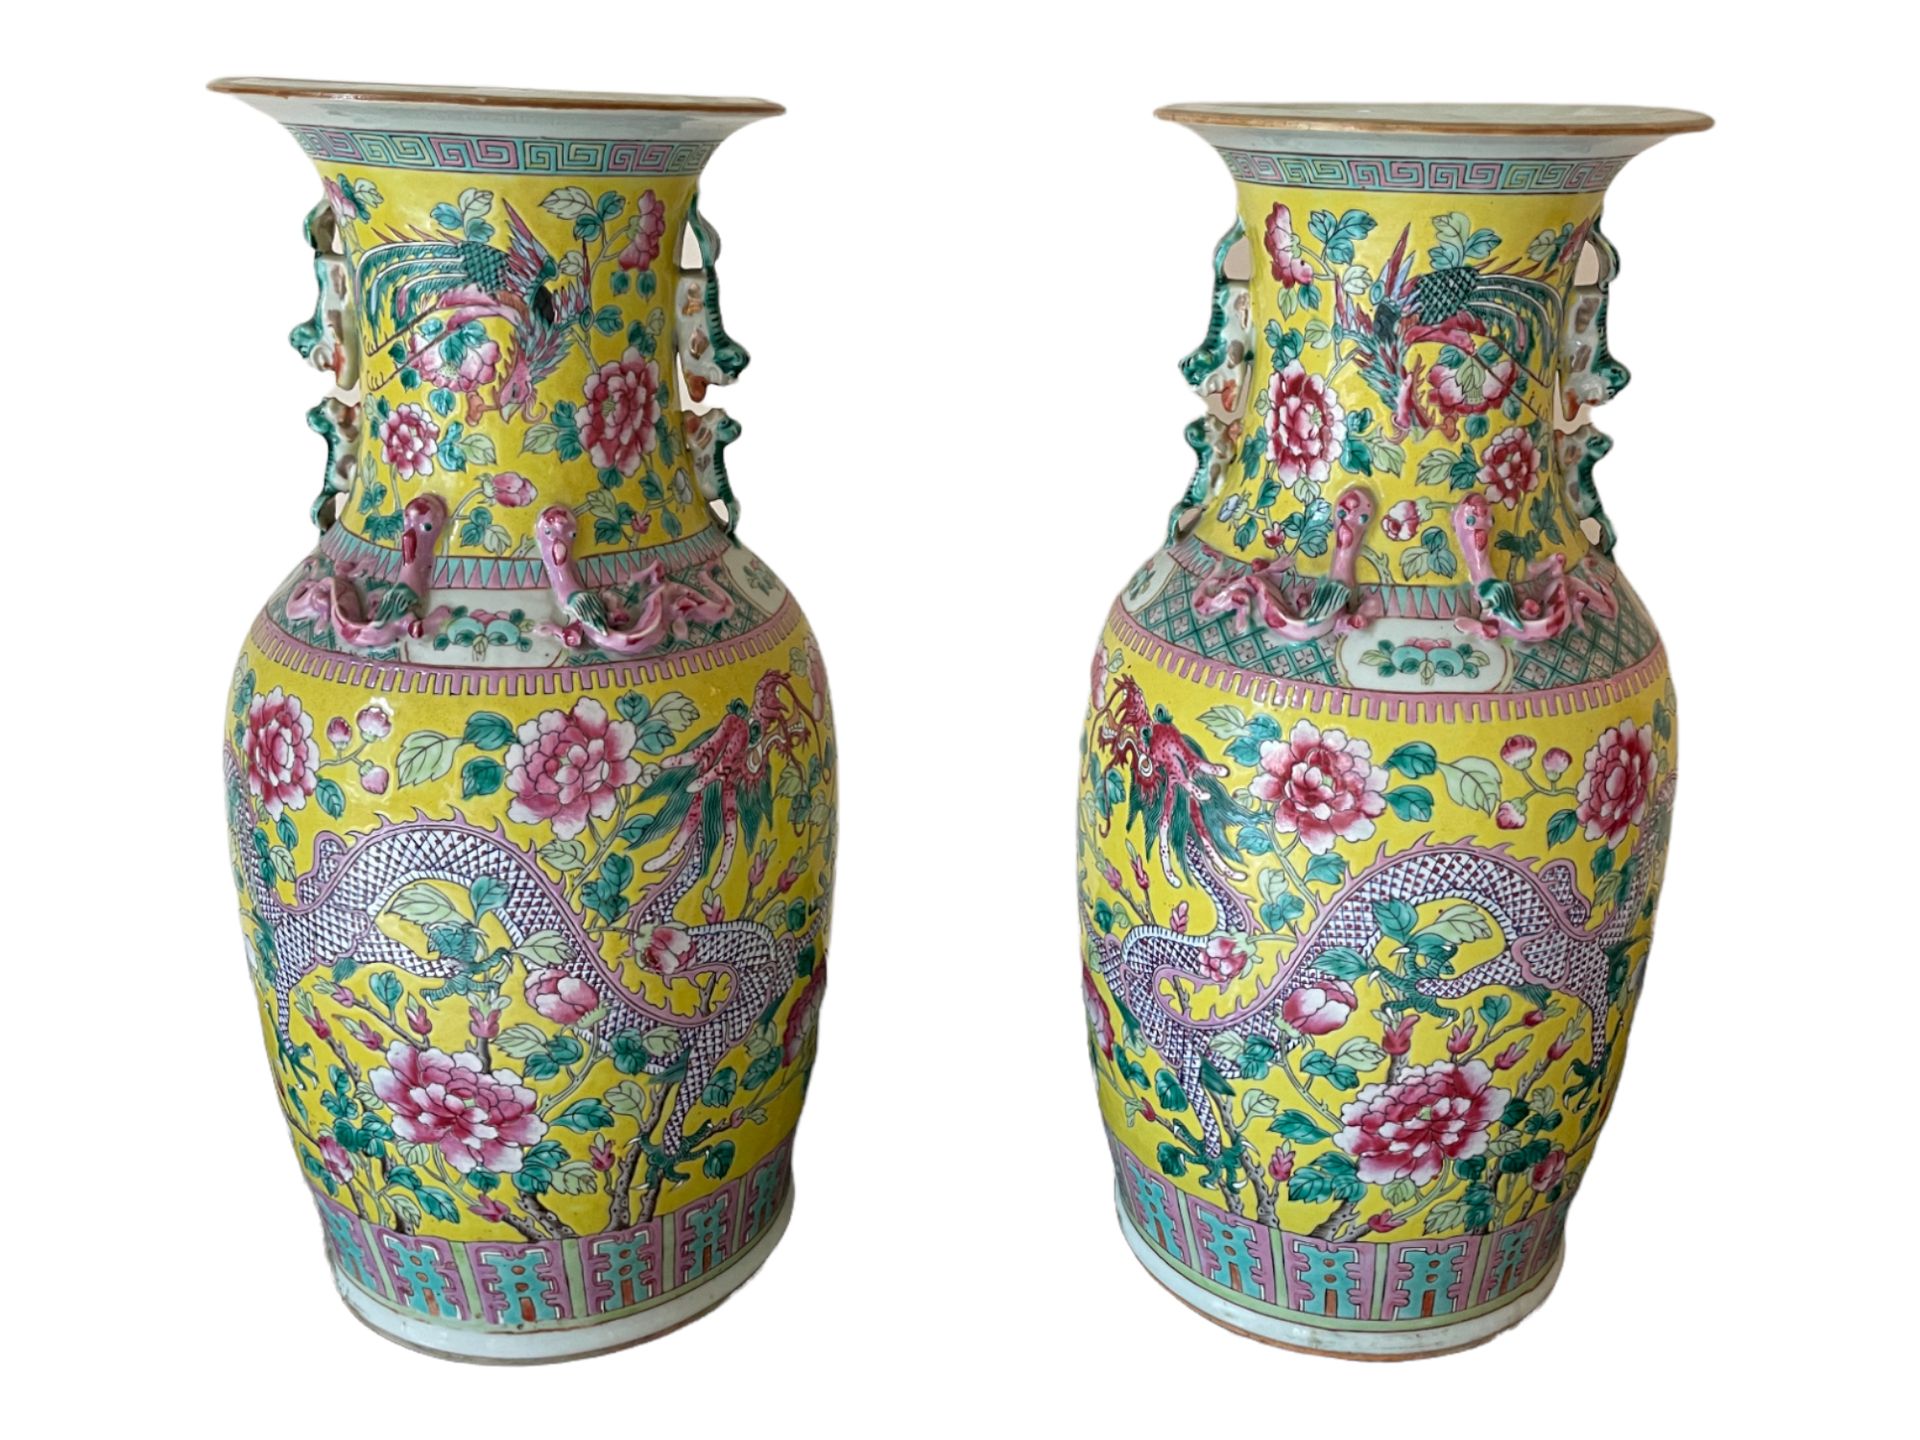 Null * China, 19th century 

Pair of porcelain vases with polychrome enamel deco&hellip;